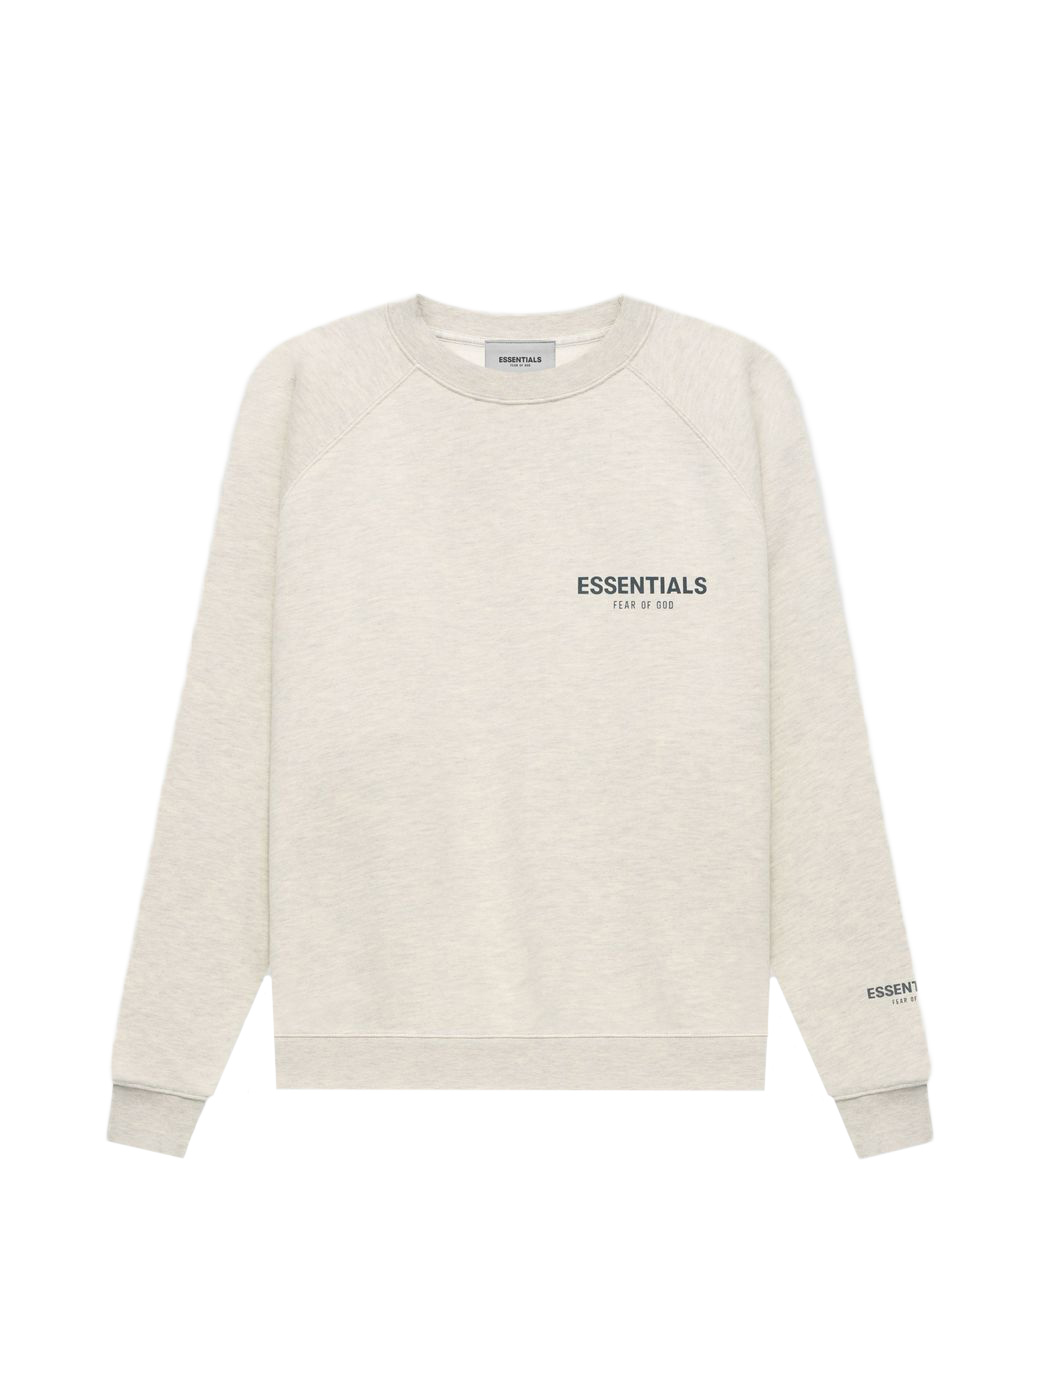 Fear of God Essentials Core Collection Pullover Crewneck Light